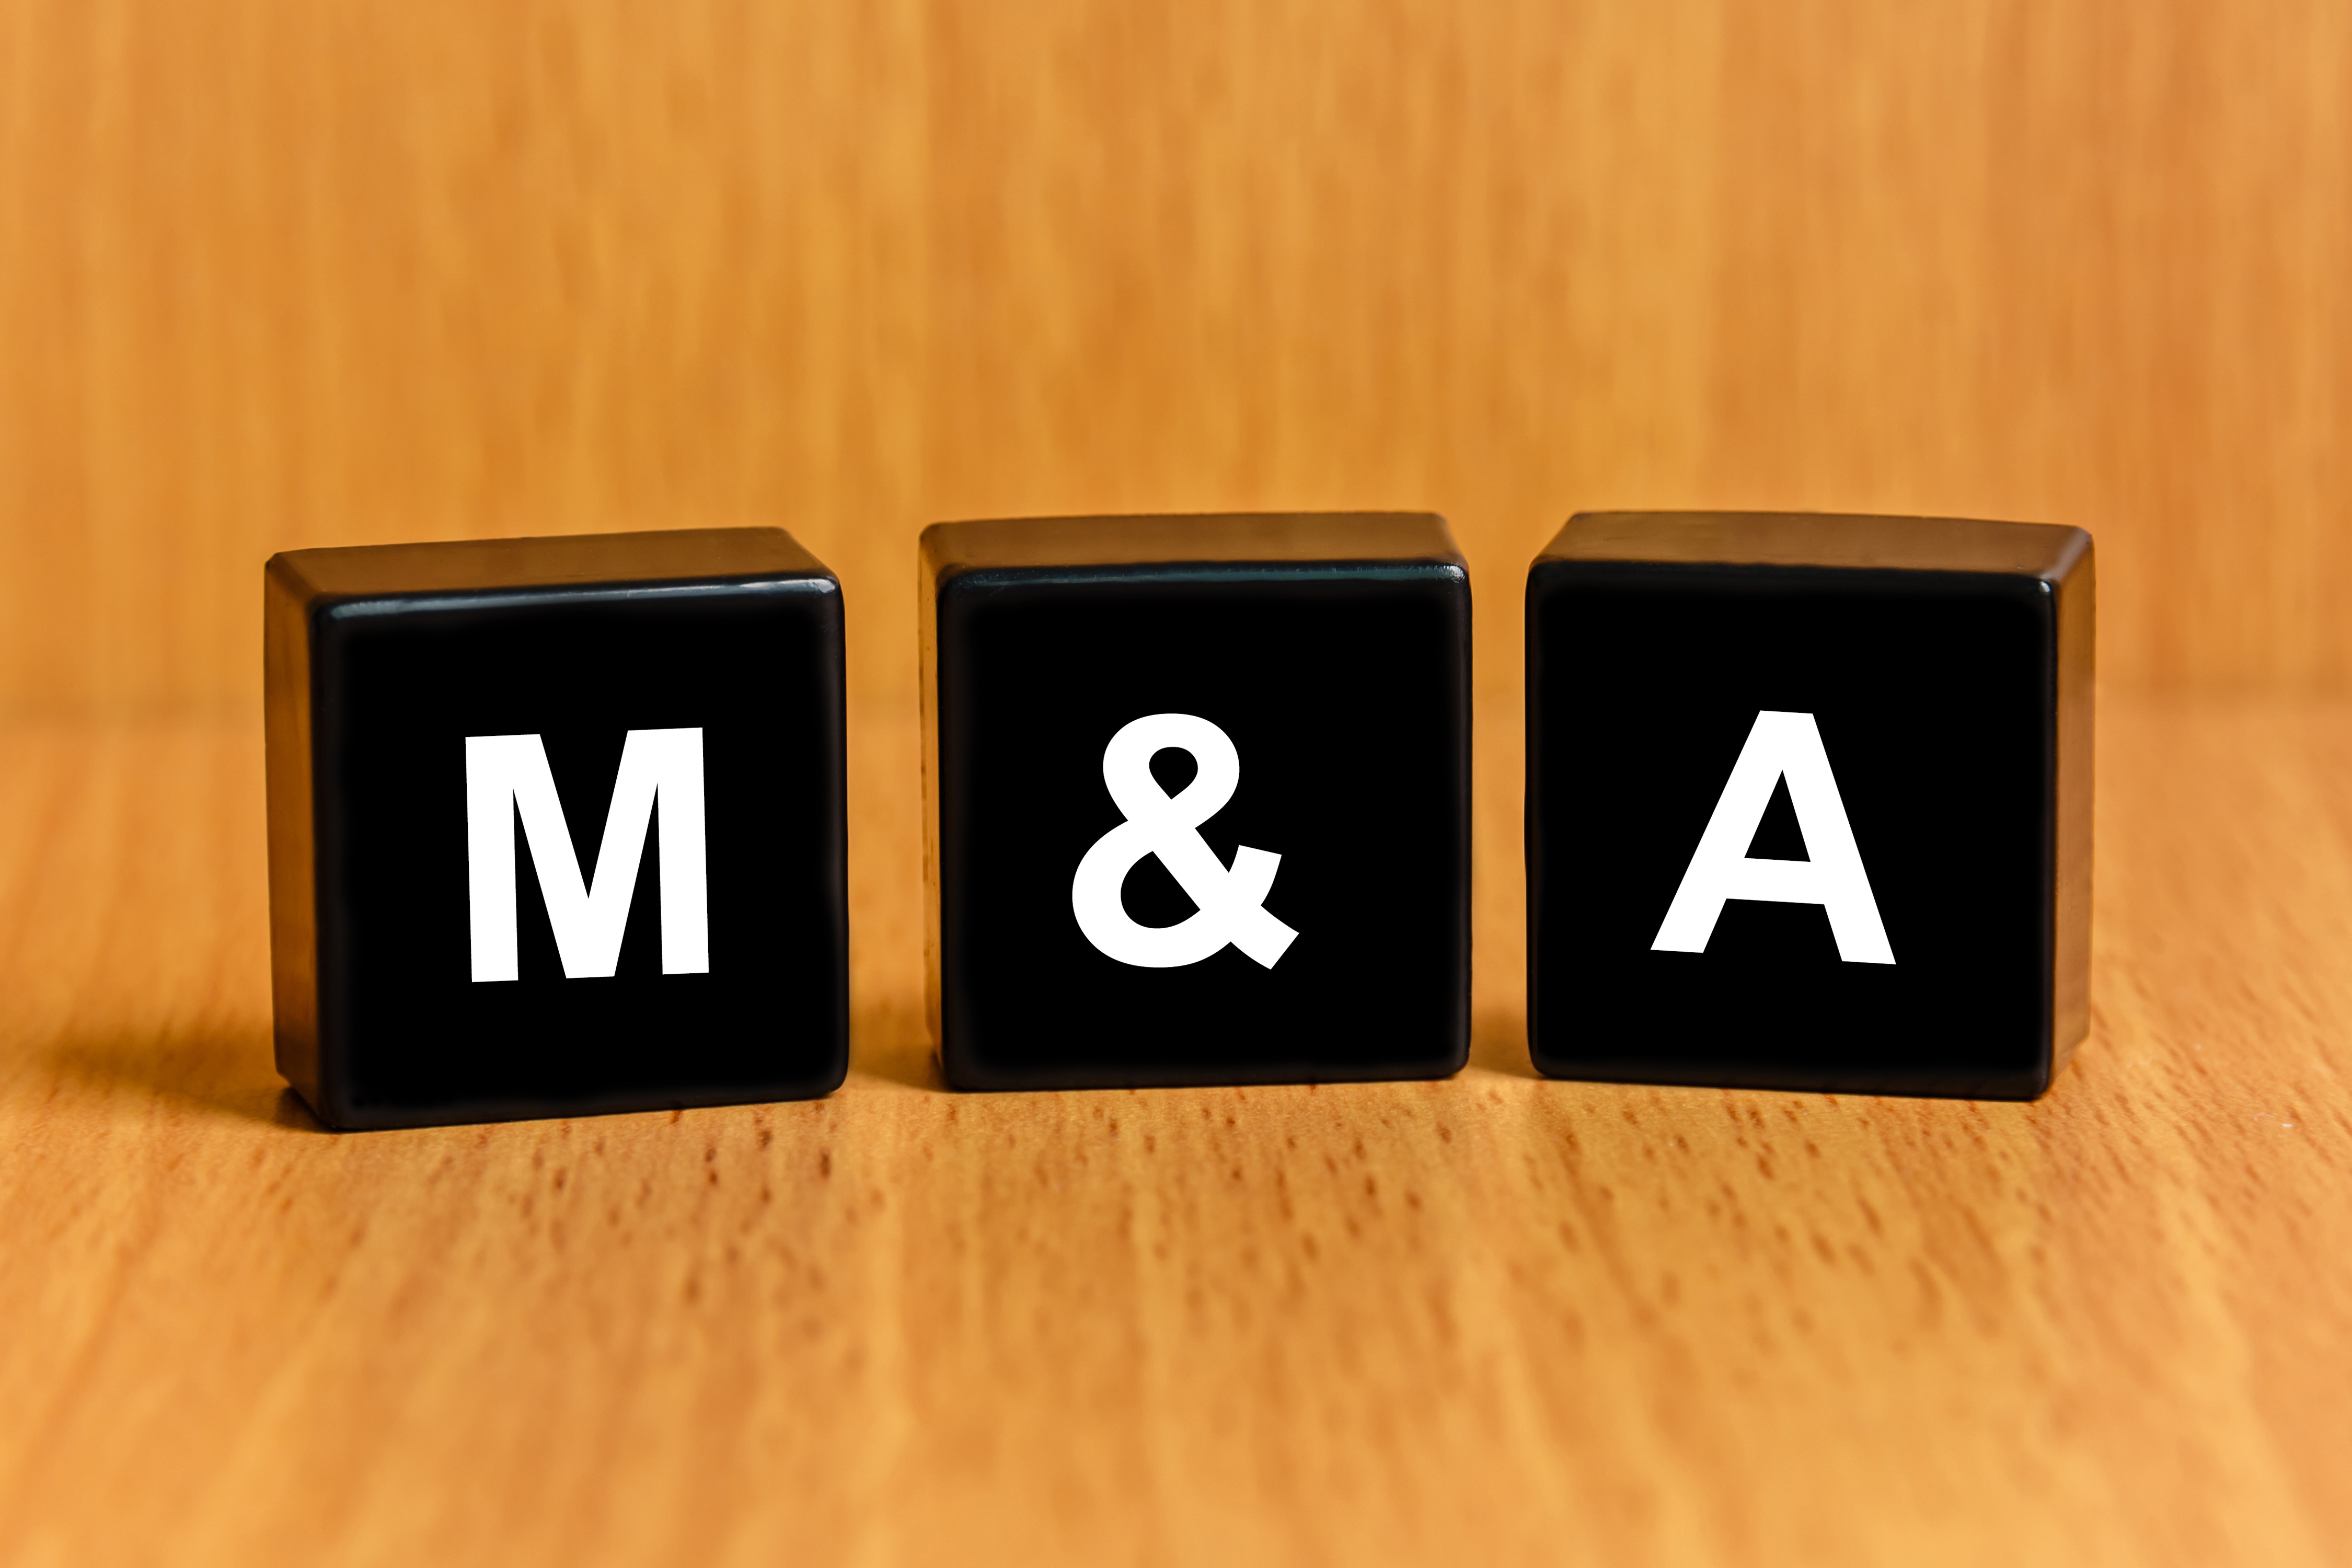 Hedge funds record first negative year since 2011 but M&A activity offers hope for 2019